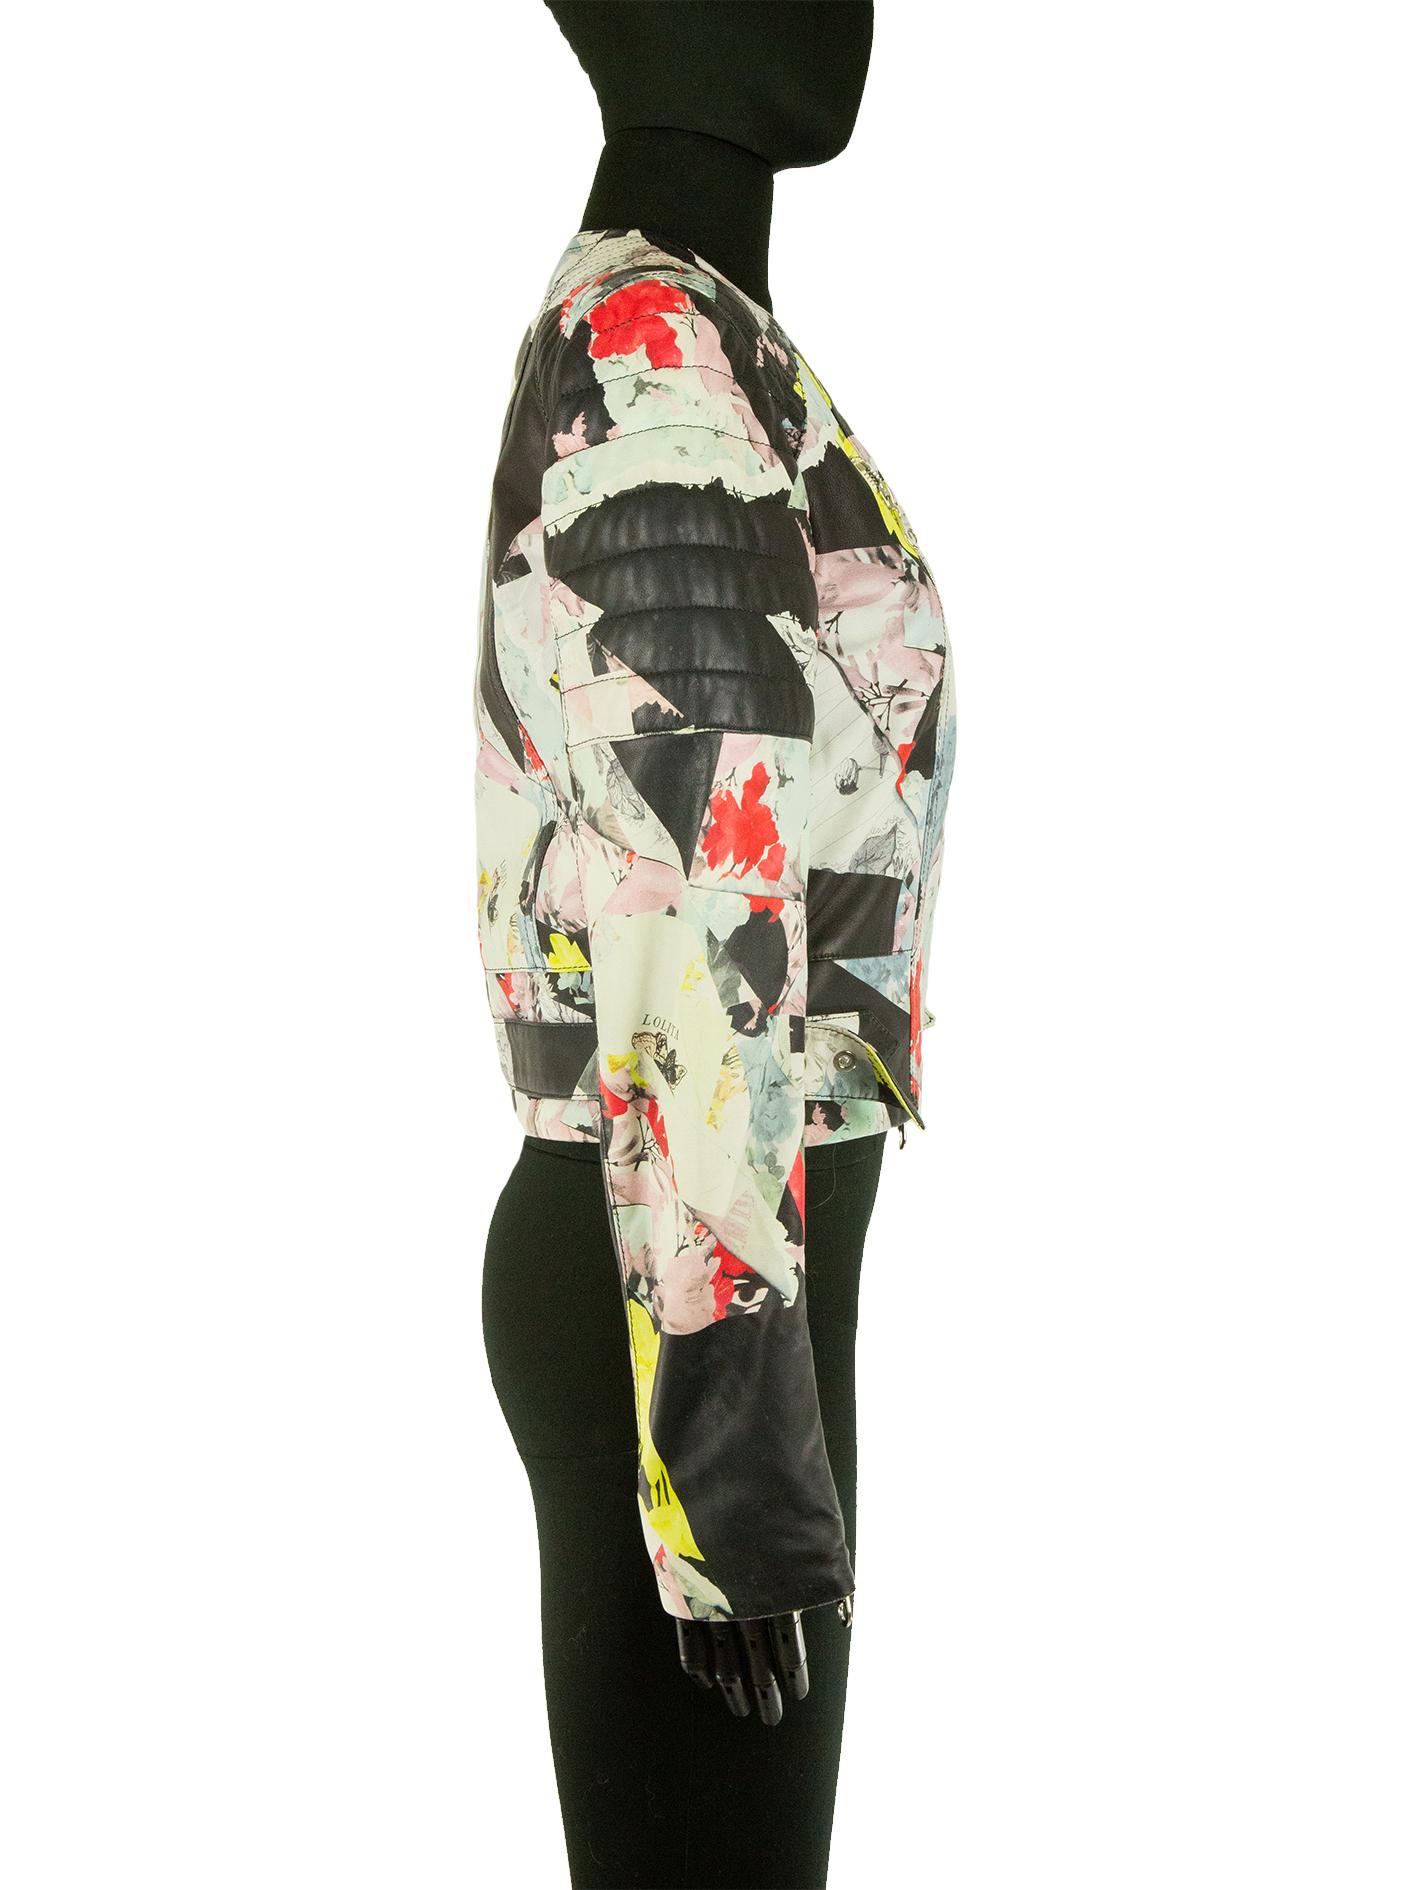 Floral And Abstract Printed Erdem Leather Biker Jacket  In Good Condition For Sale In London, GB